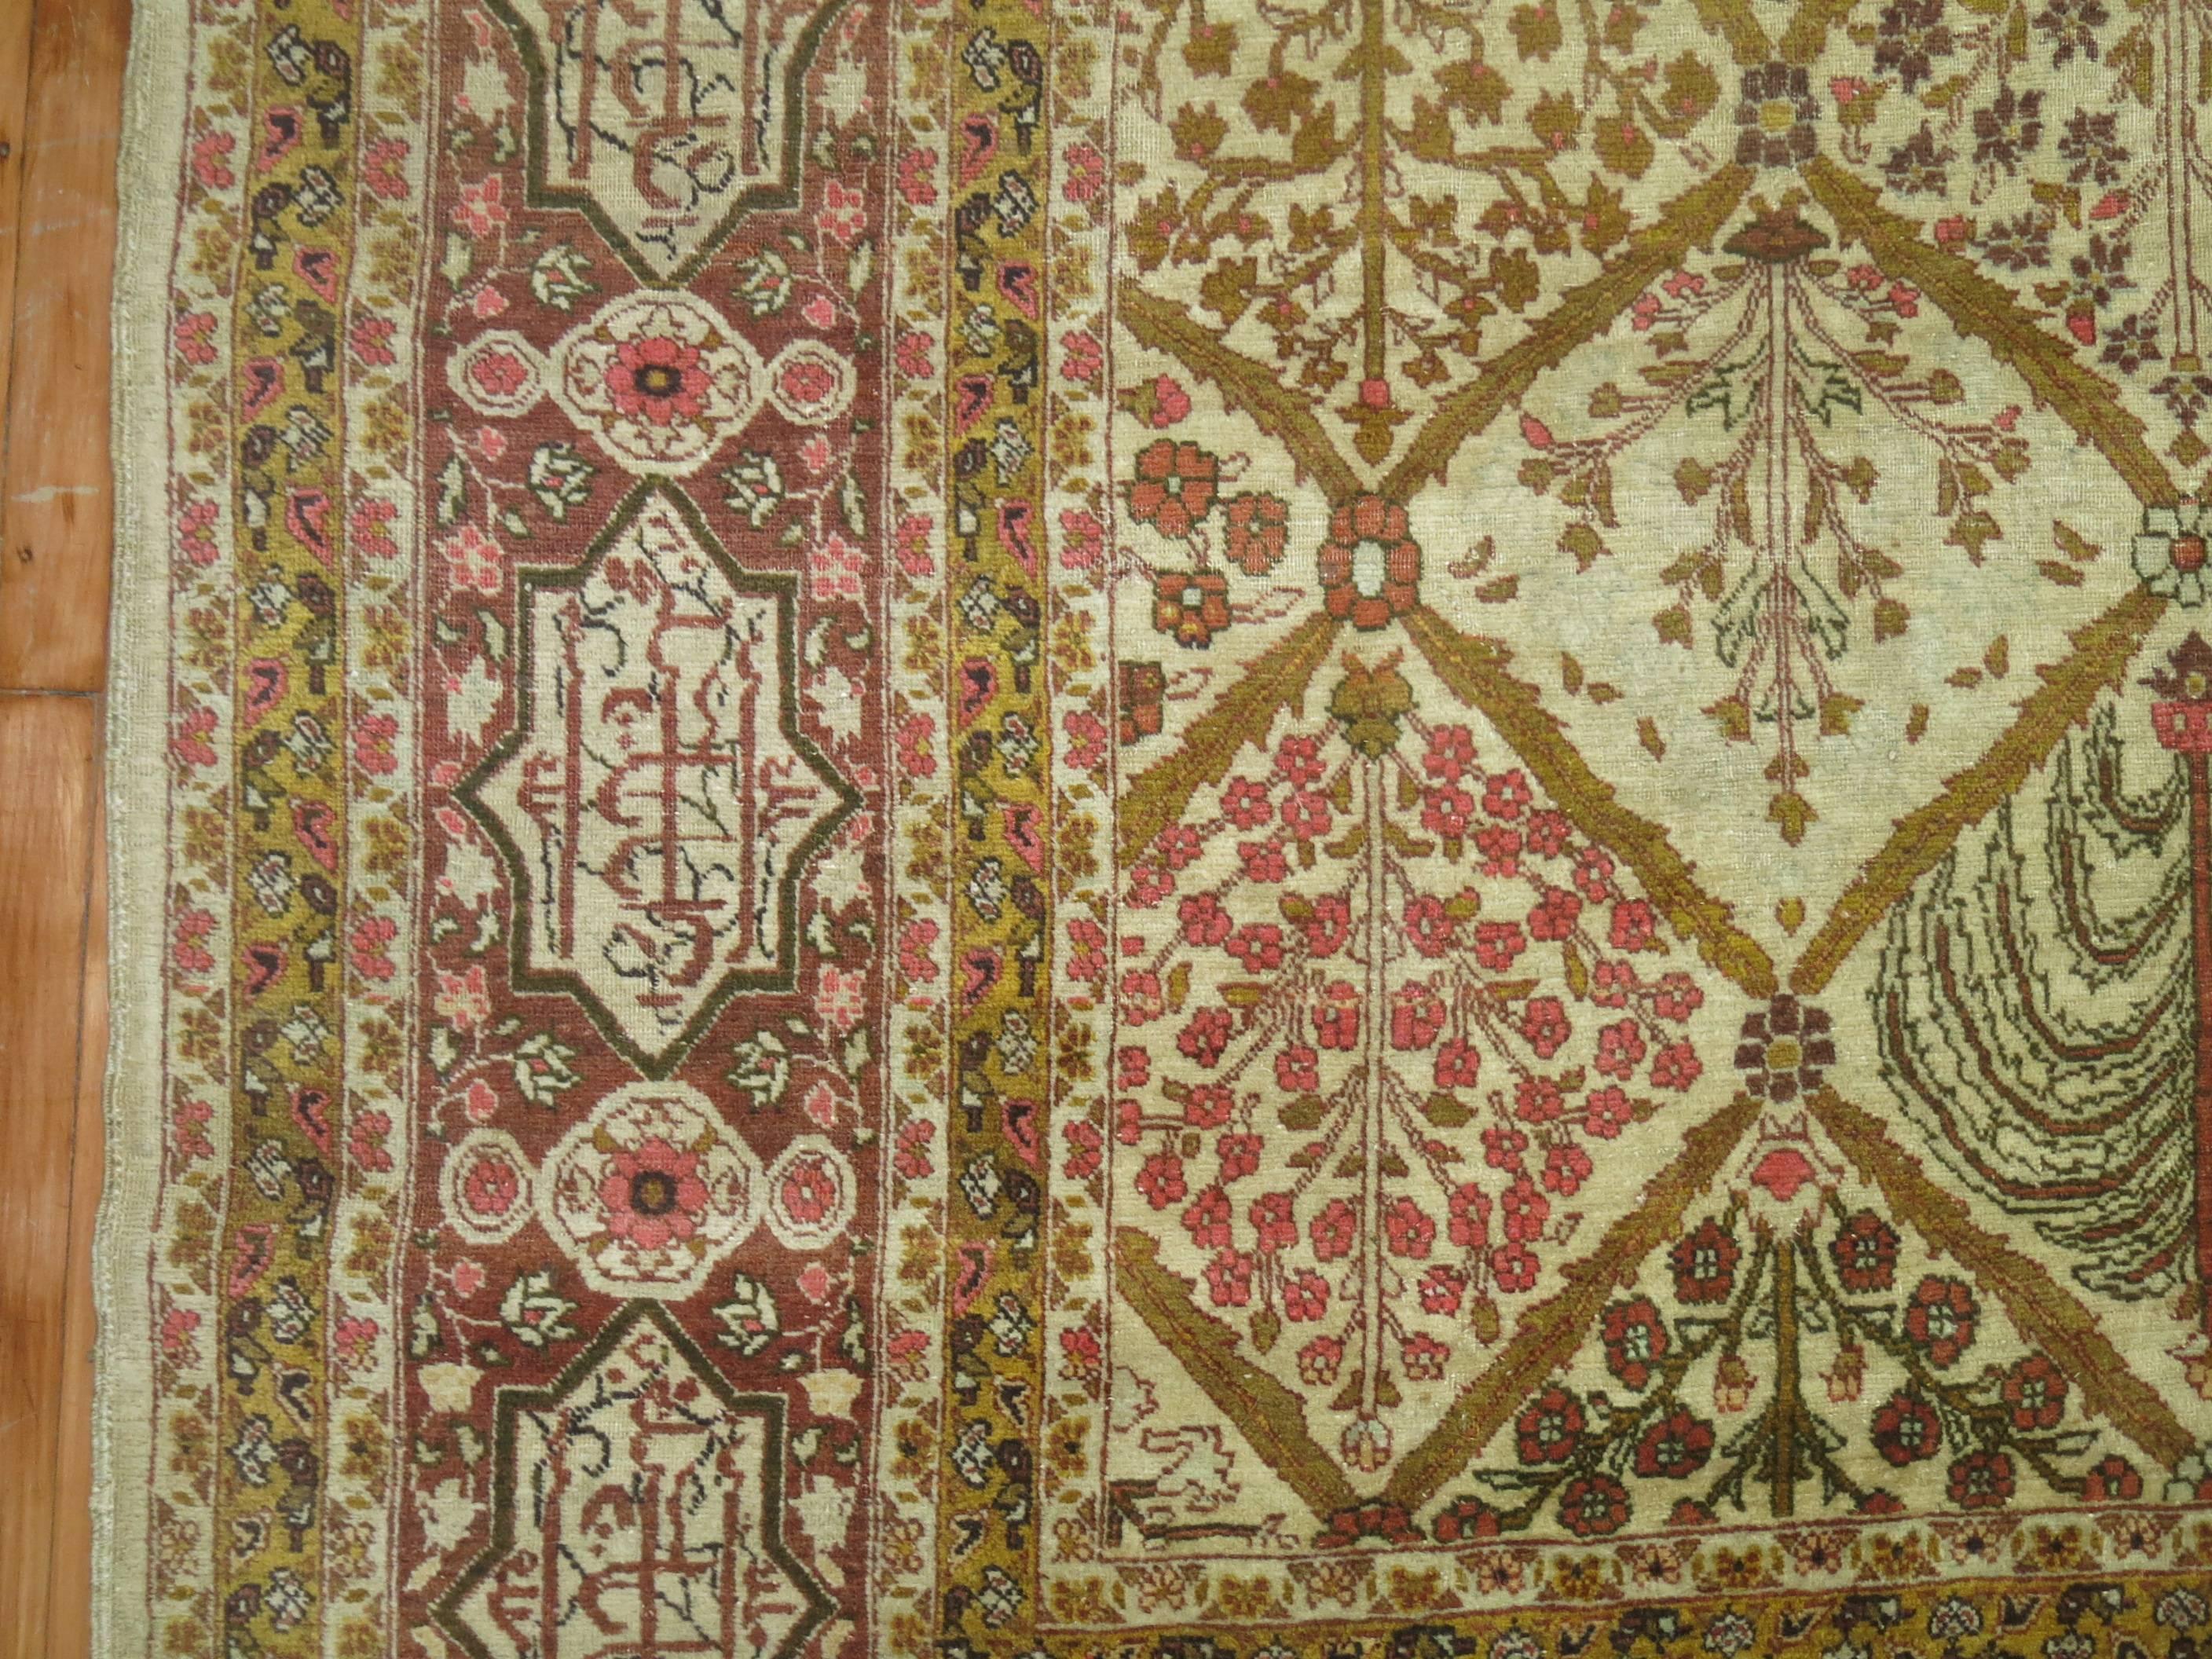 Stunning Garden Persian Tabriz Love Poem Room Size Carpet In Good Condition For Sale In New York, NY